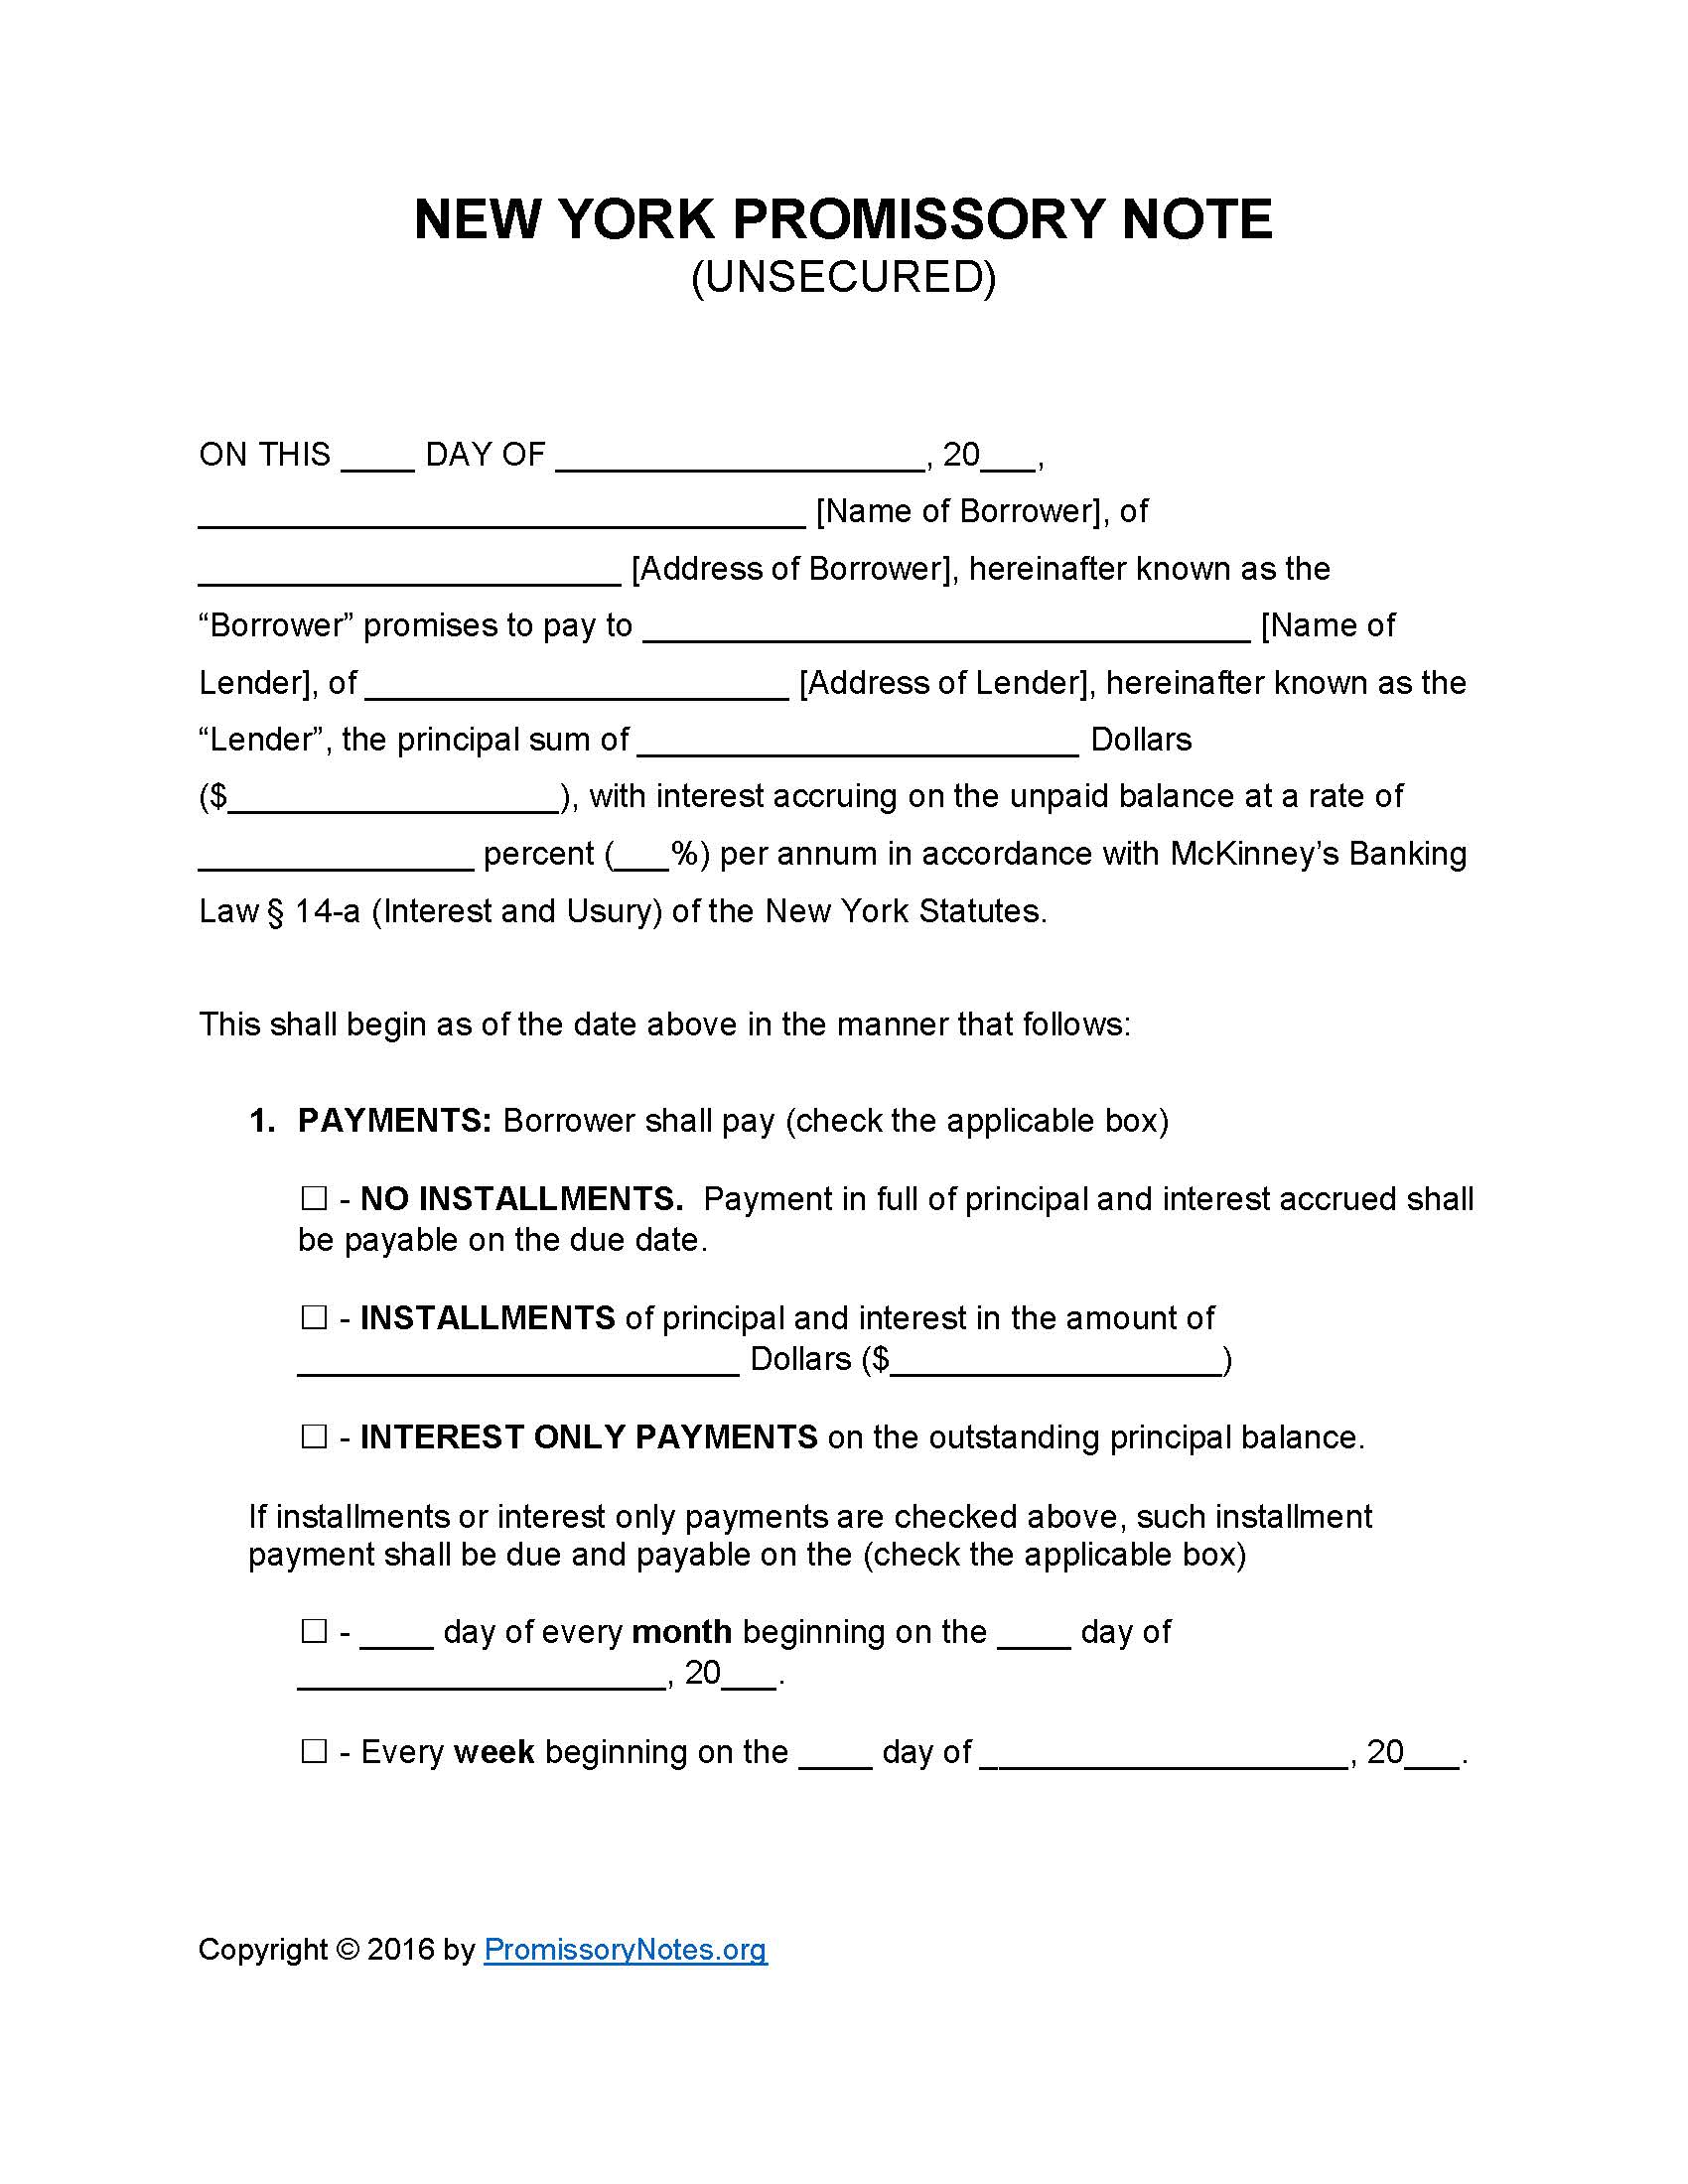 New York Unsecured Promissory Note Template - Promissory Notes With Regard To promise to pay agreement template